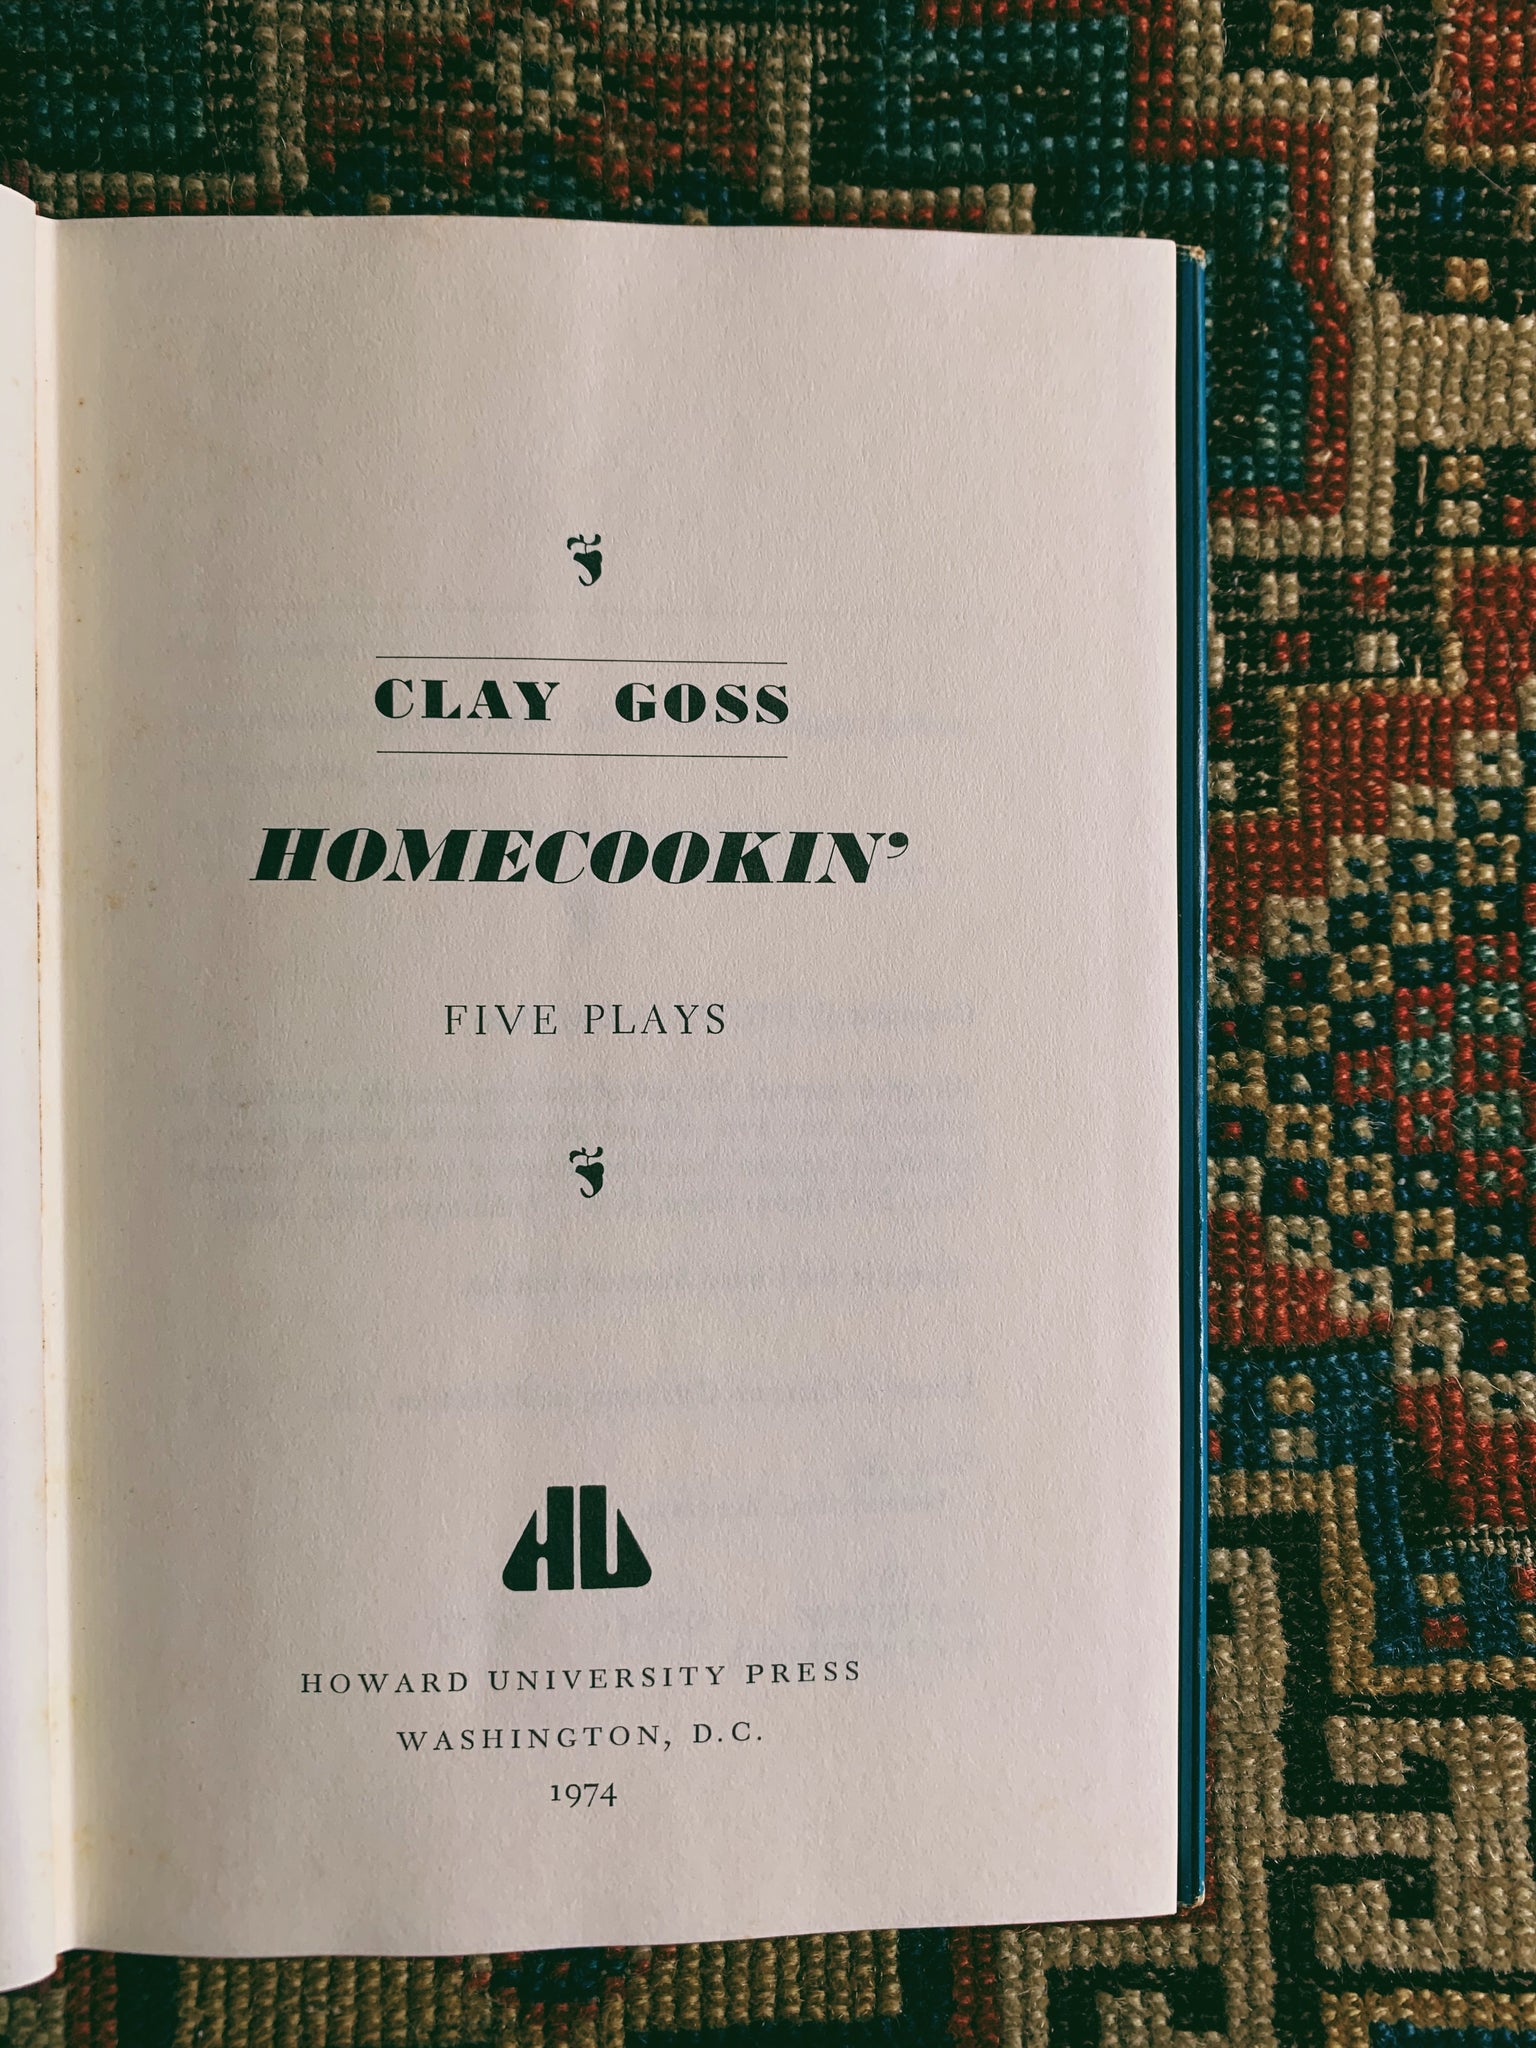 Vintage Hardcover “Homecookin’: Five Plays” By Clay Goss (1974)